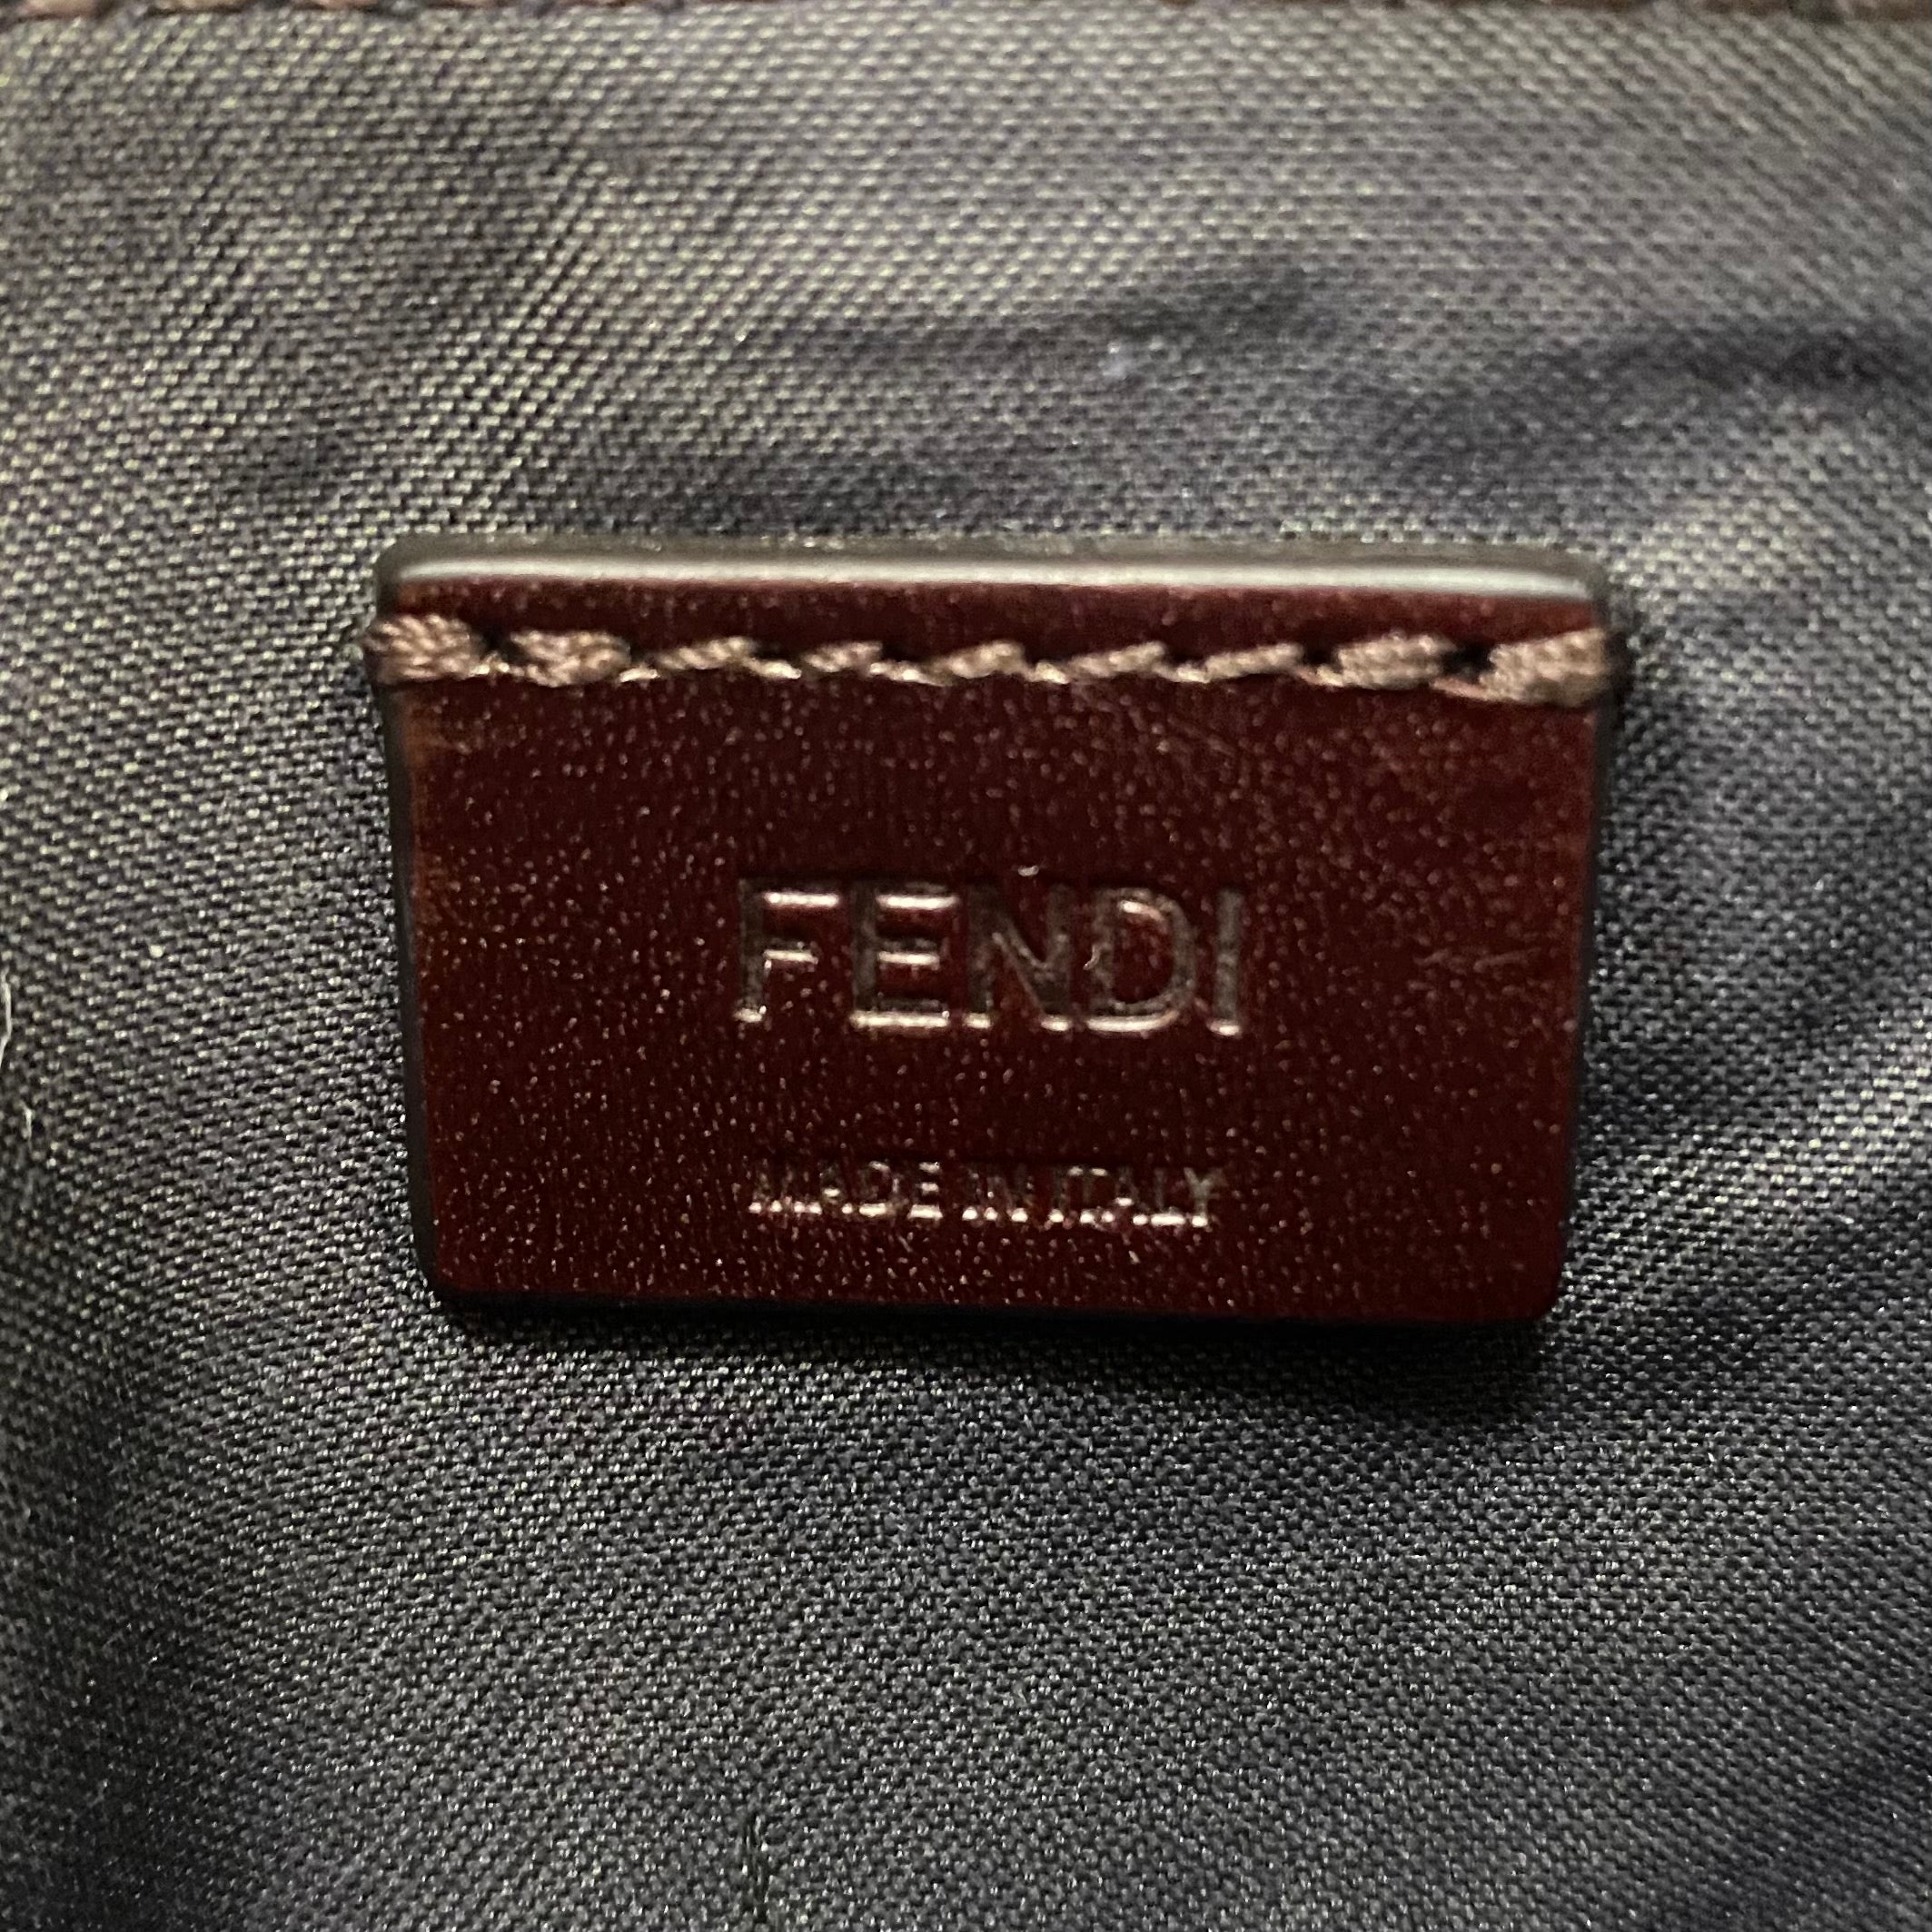 Fendi Python and Leather Triplette Pouch